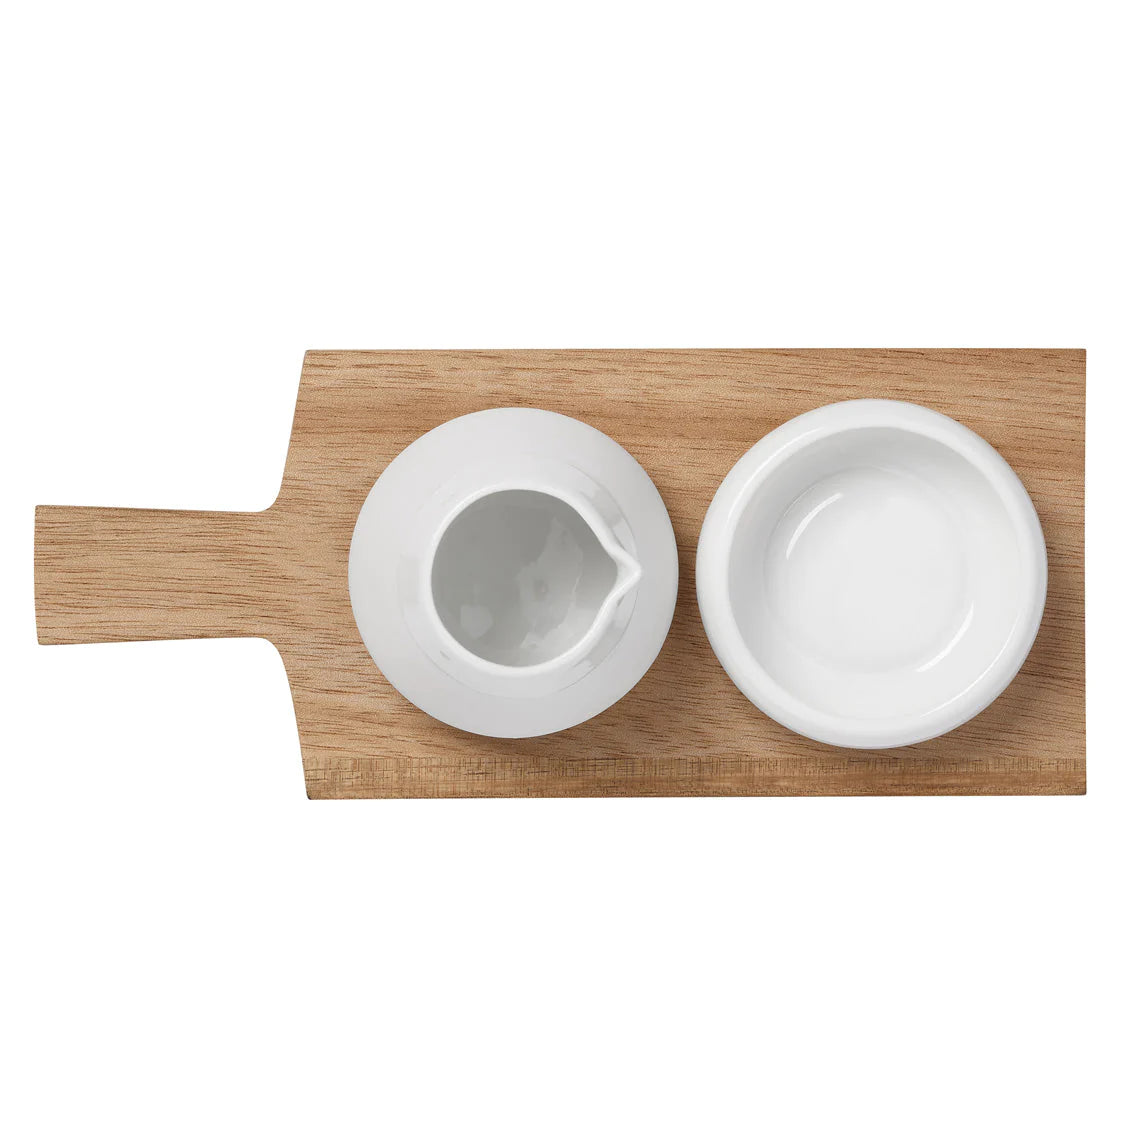 Oil And Salt Pots With Acacia Wood Tray